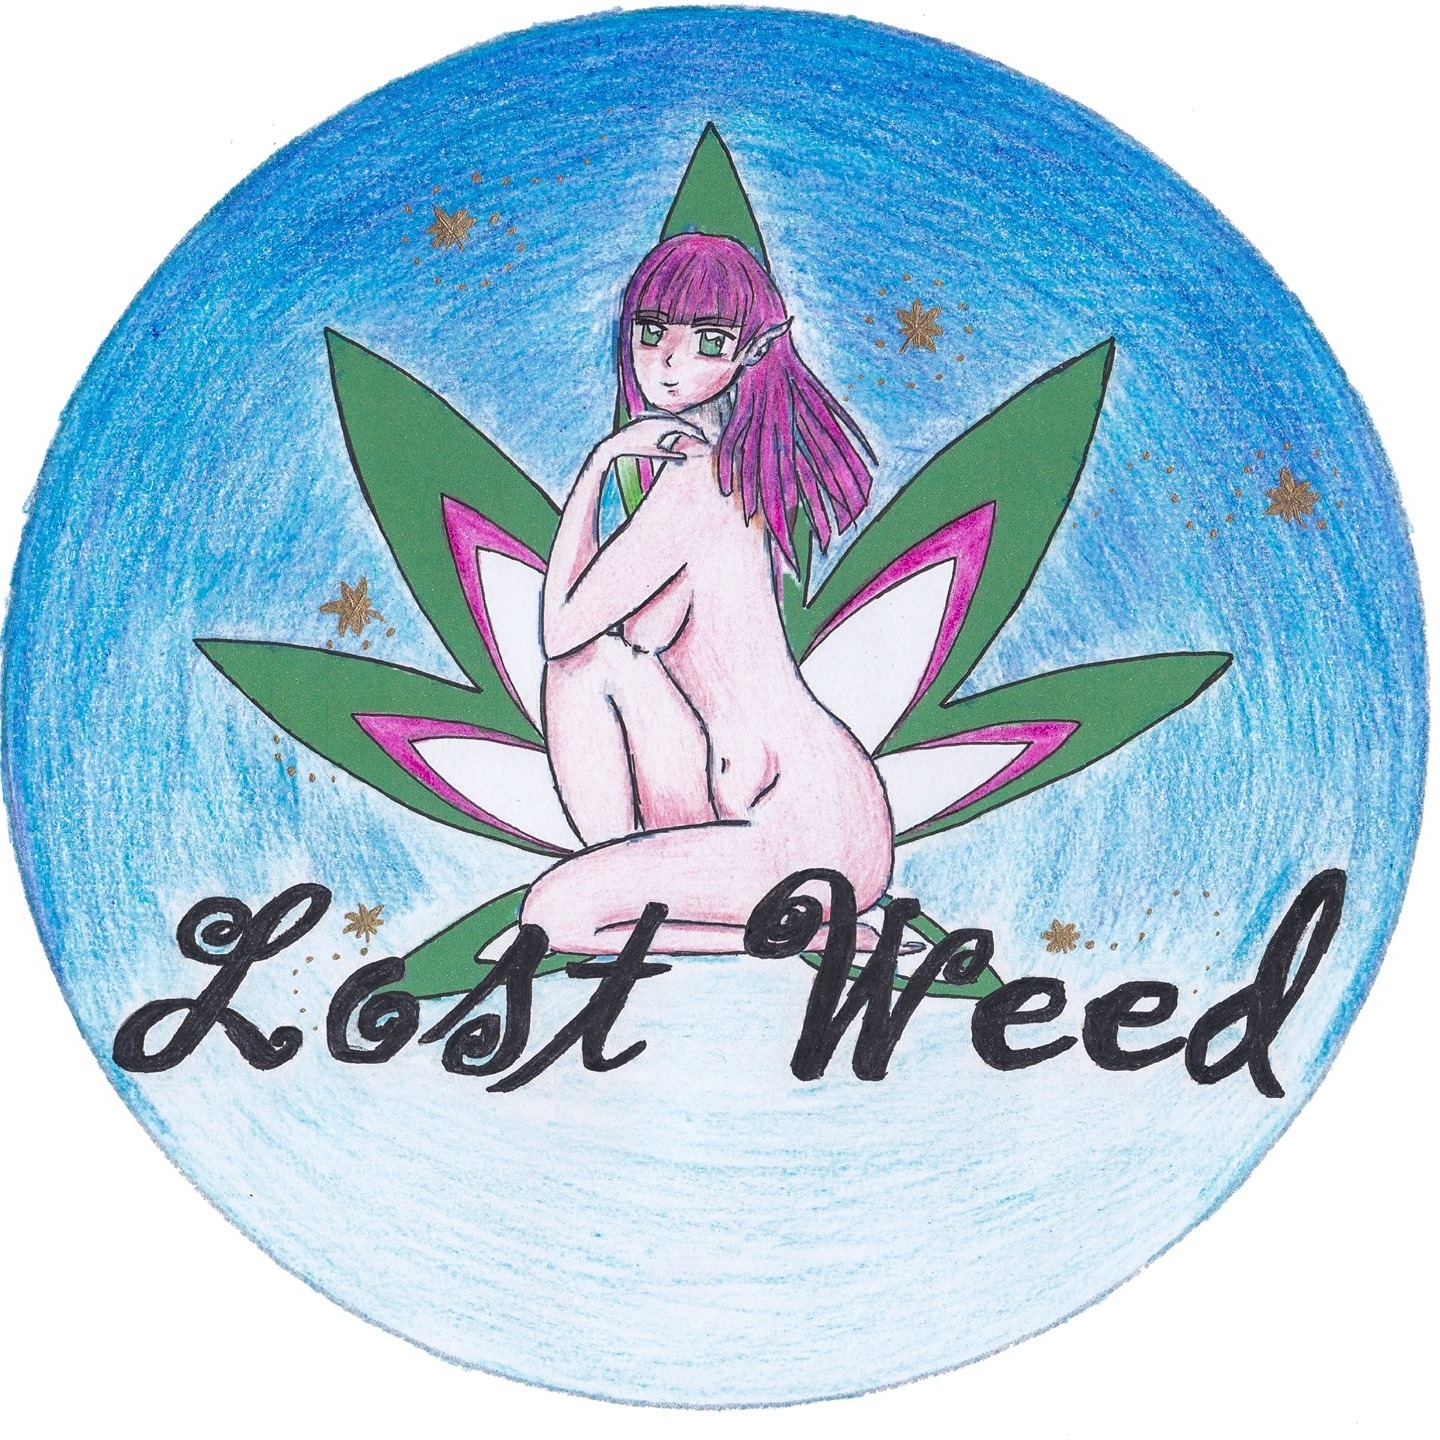 Lost Weed